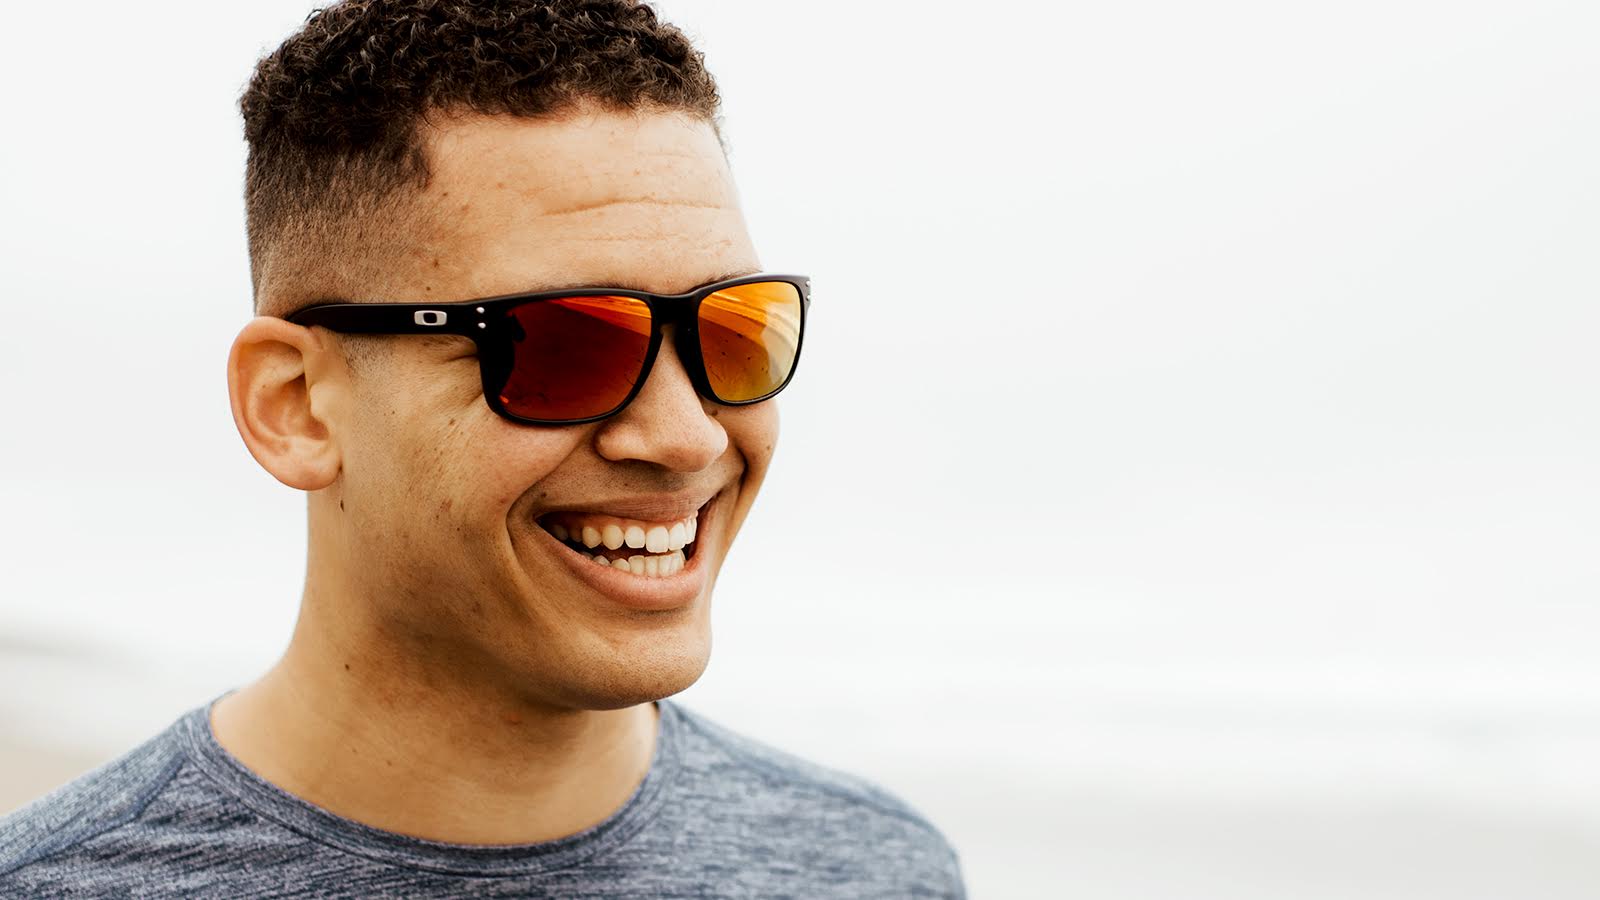 Man smiling with sunglasses on his face